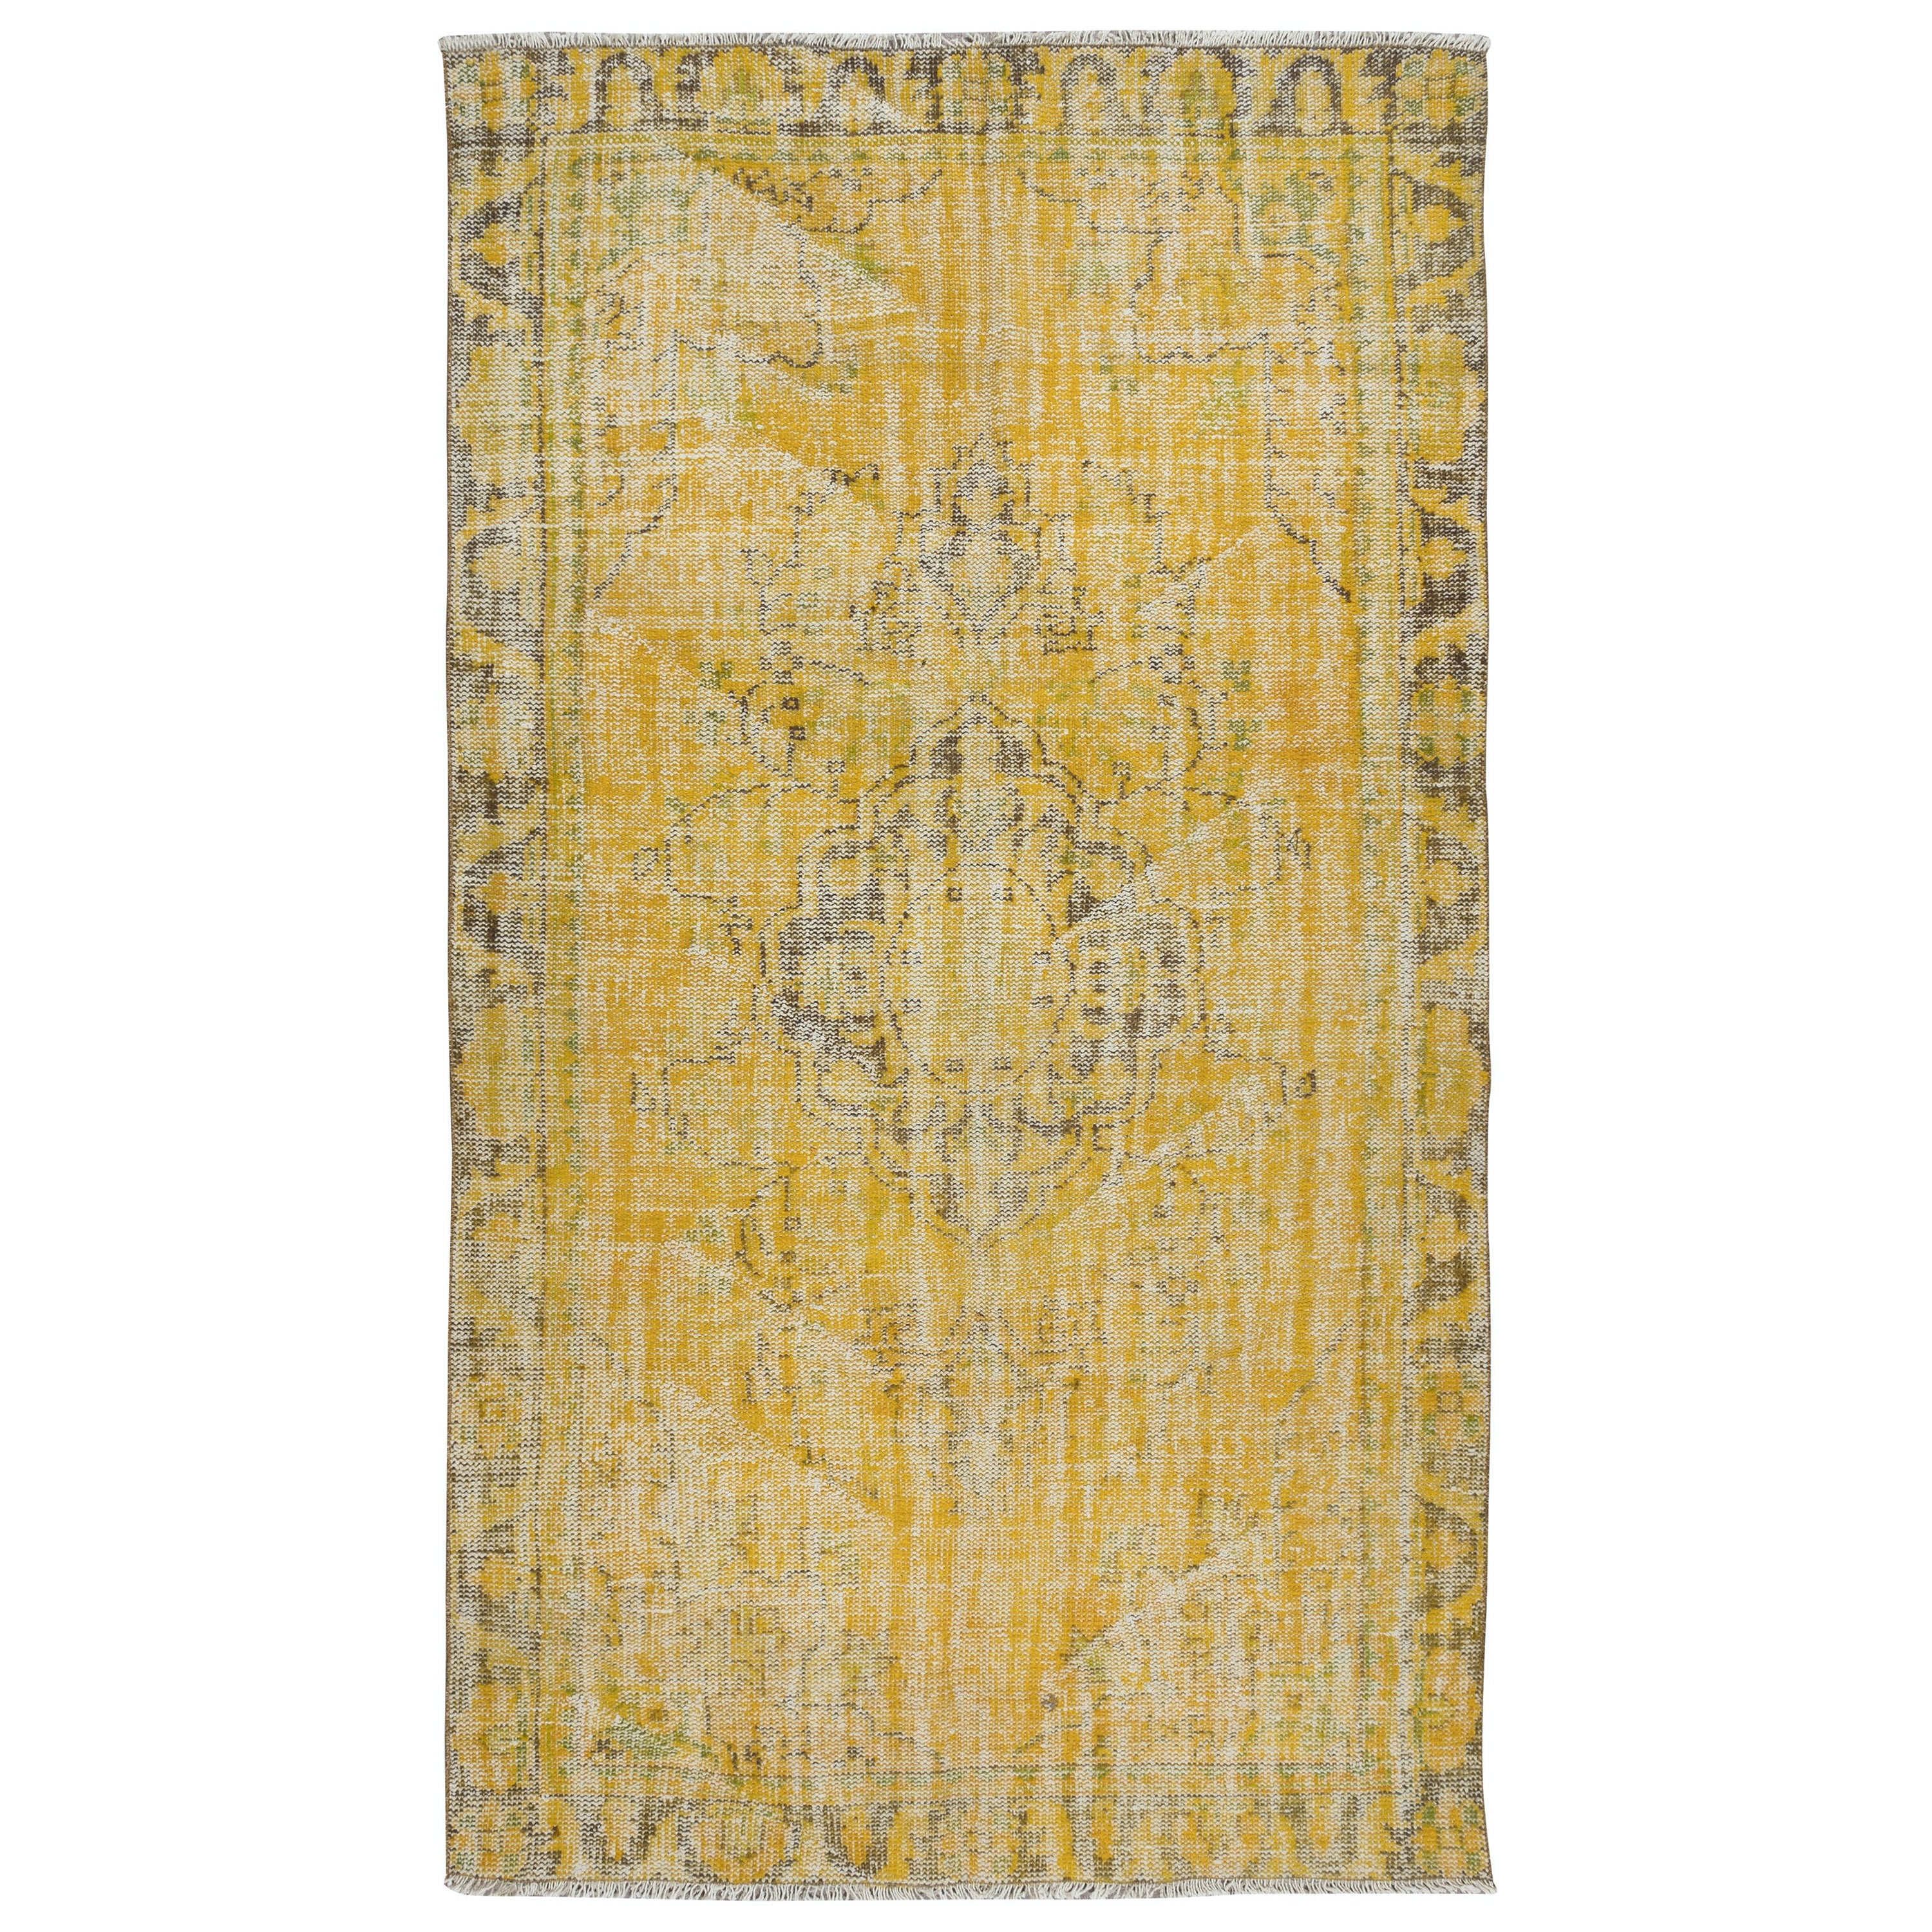 5.7x9.6 Ft Yellow Area Rug From Turkey, Hand Knotted Contemporary Wool Carpet